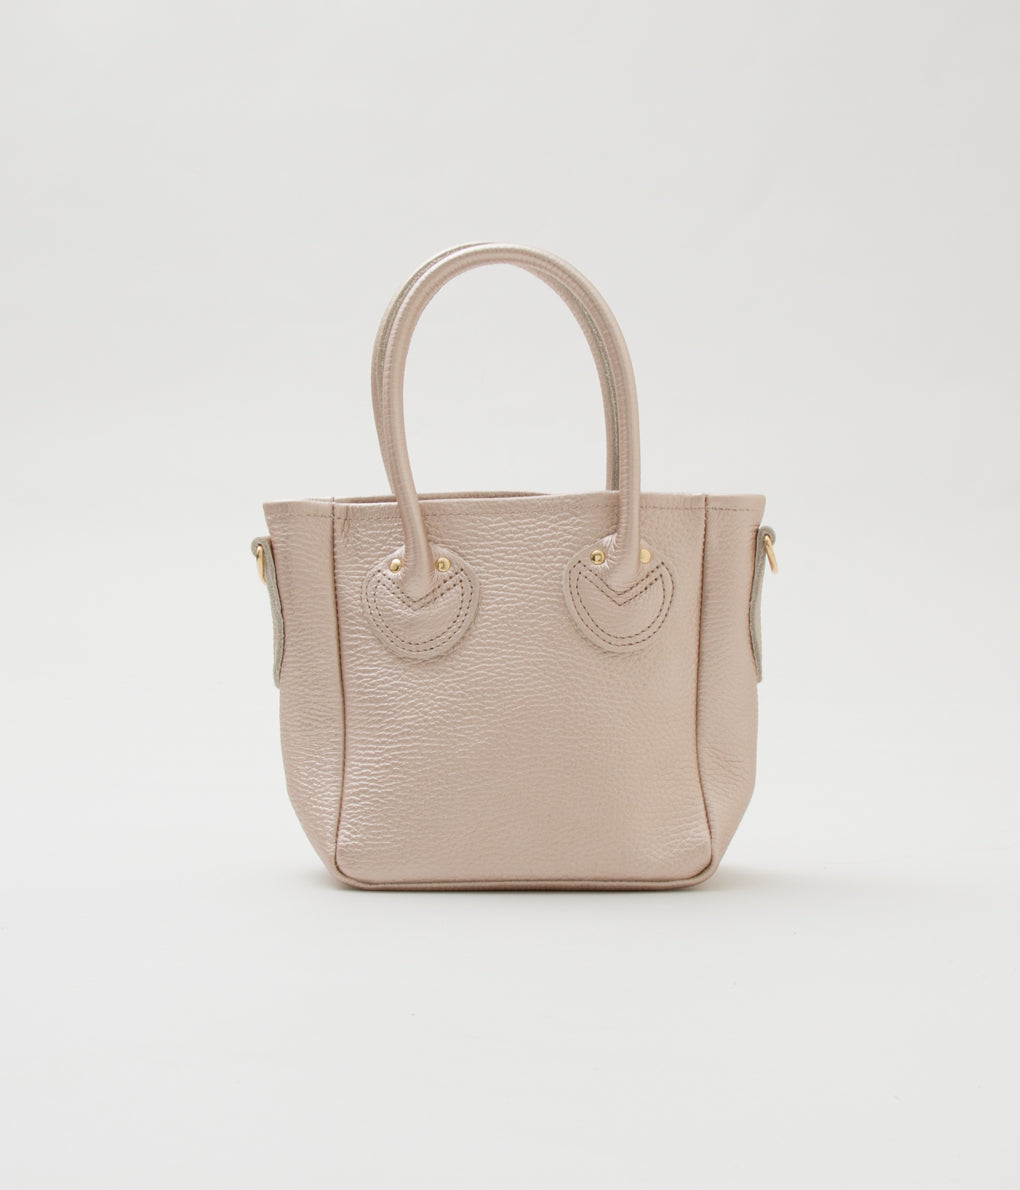 YOUNG & OLSEN THE DRYGOODS STORE "EMBOSSED LEATHER D TOTE XS"(CHAMPAGNE)